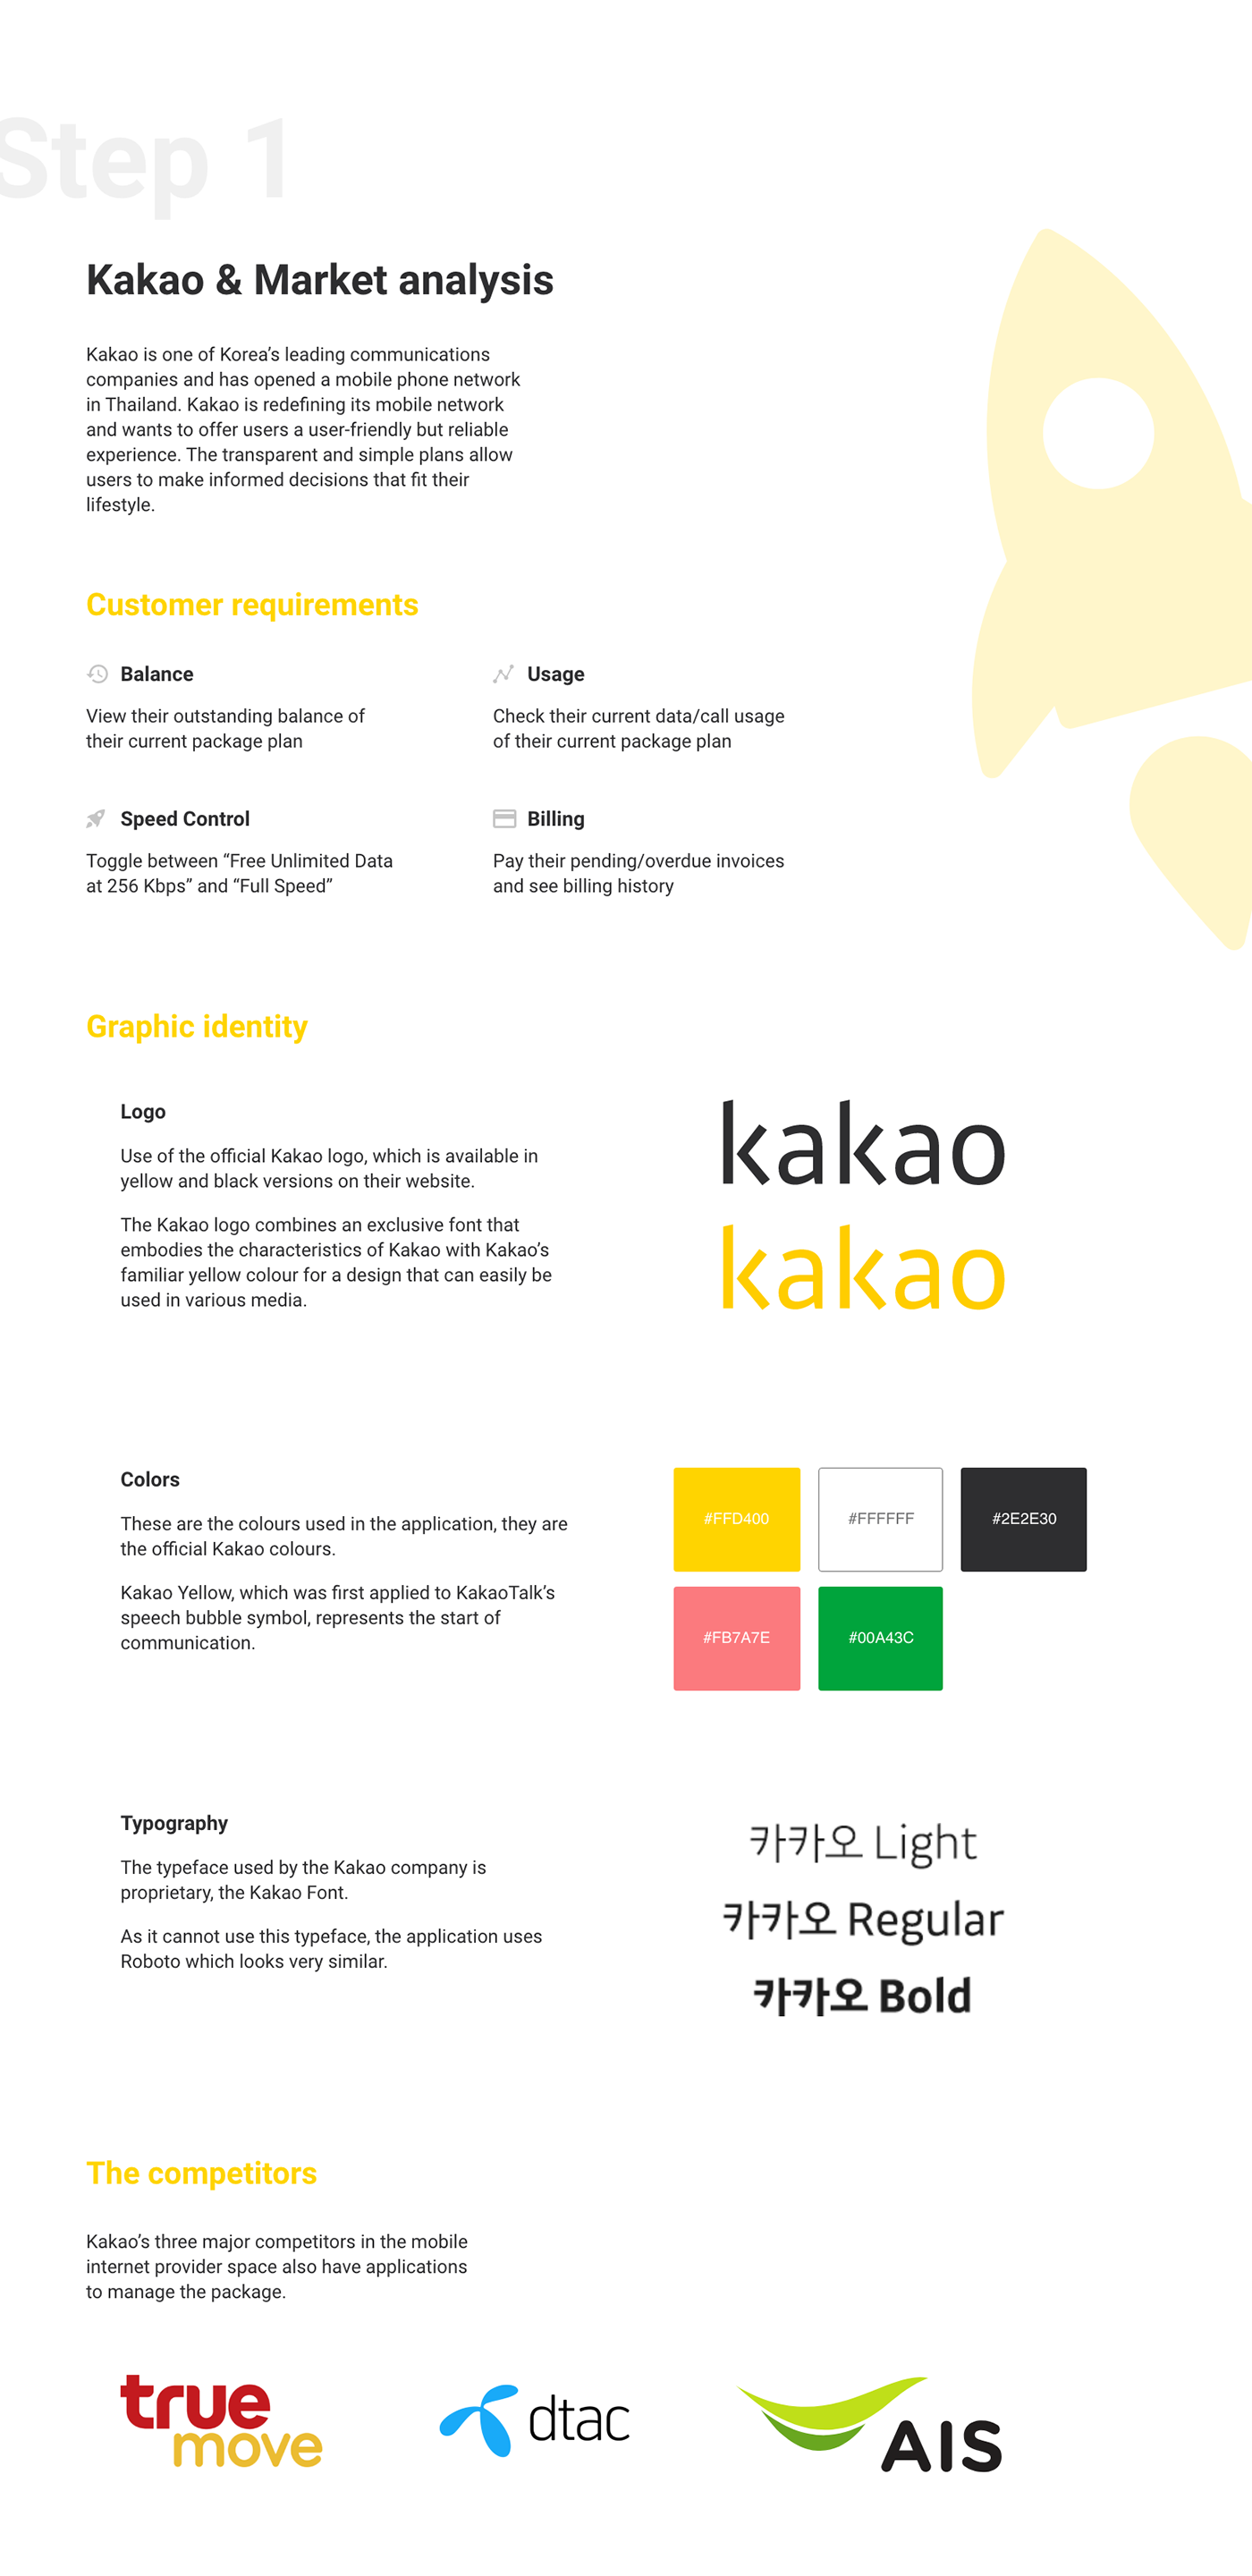 agency friendly Kakao Korea lifestyle Mobile network network package phone Thailand